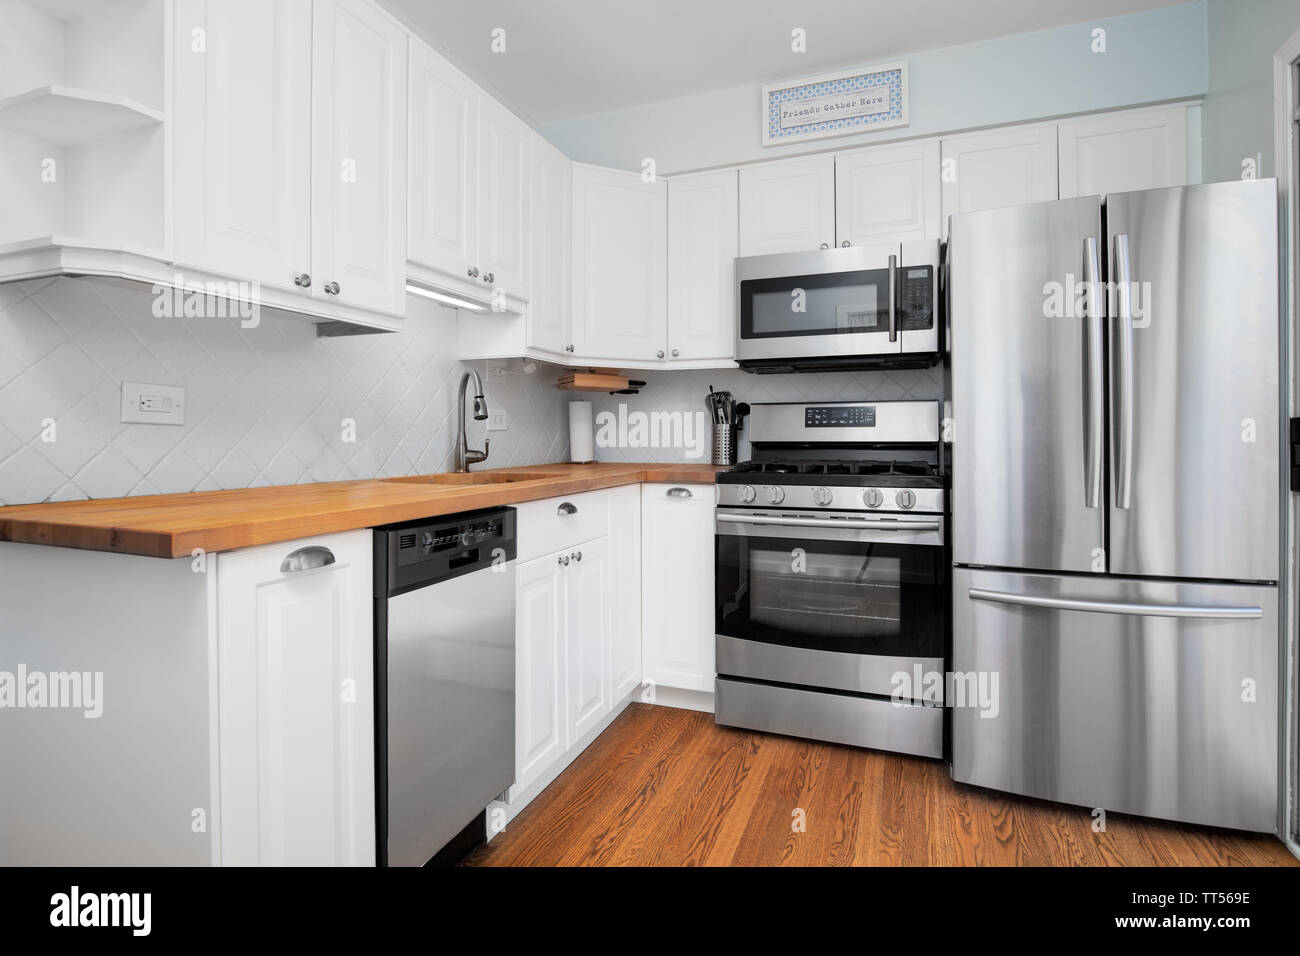 A small kitchen with stainless steel appliances, white cabinets, and a natural light colored wood counter top. Stock Photo